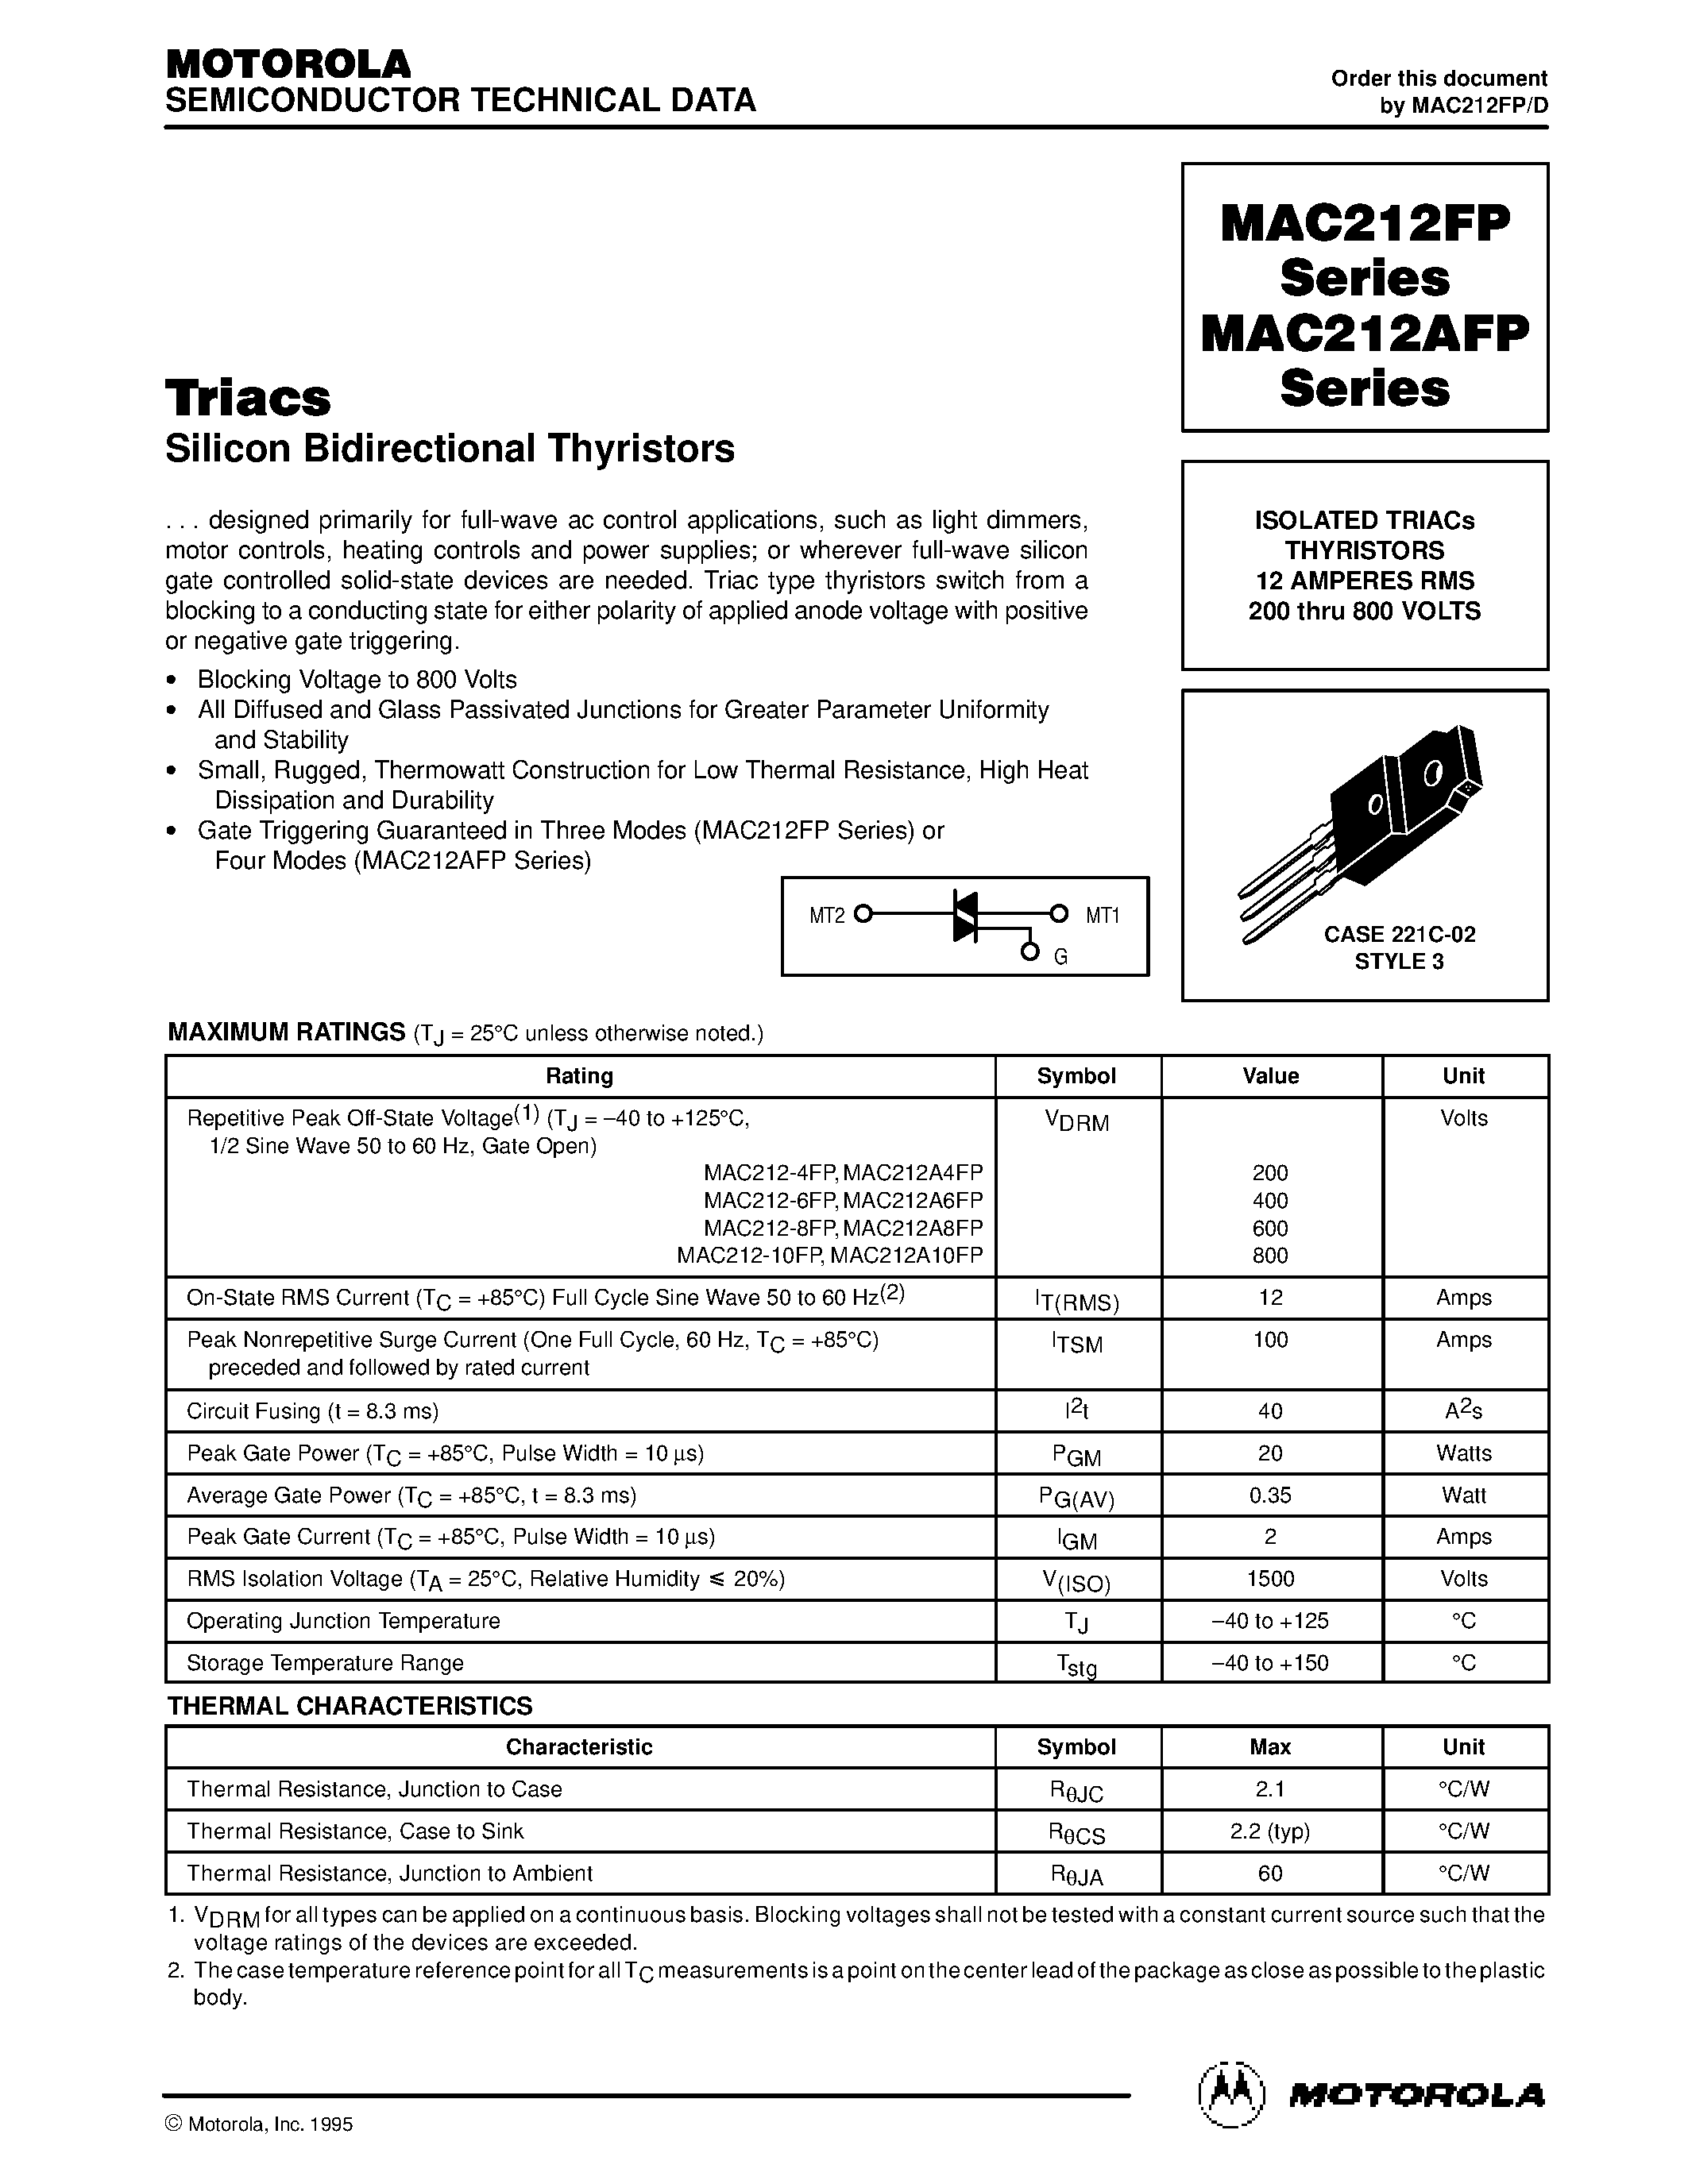 Datasheet MAC212-6FP - ISOLATED TRIACs THYRISTORS 12 AMPERES RMS 200 thru 800 VOLTS page 1